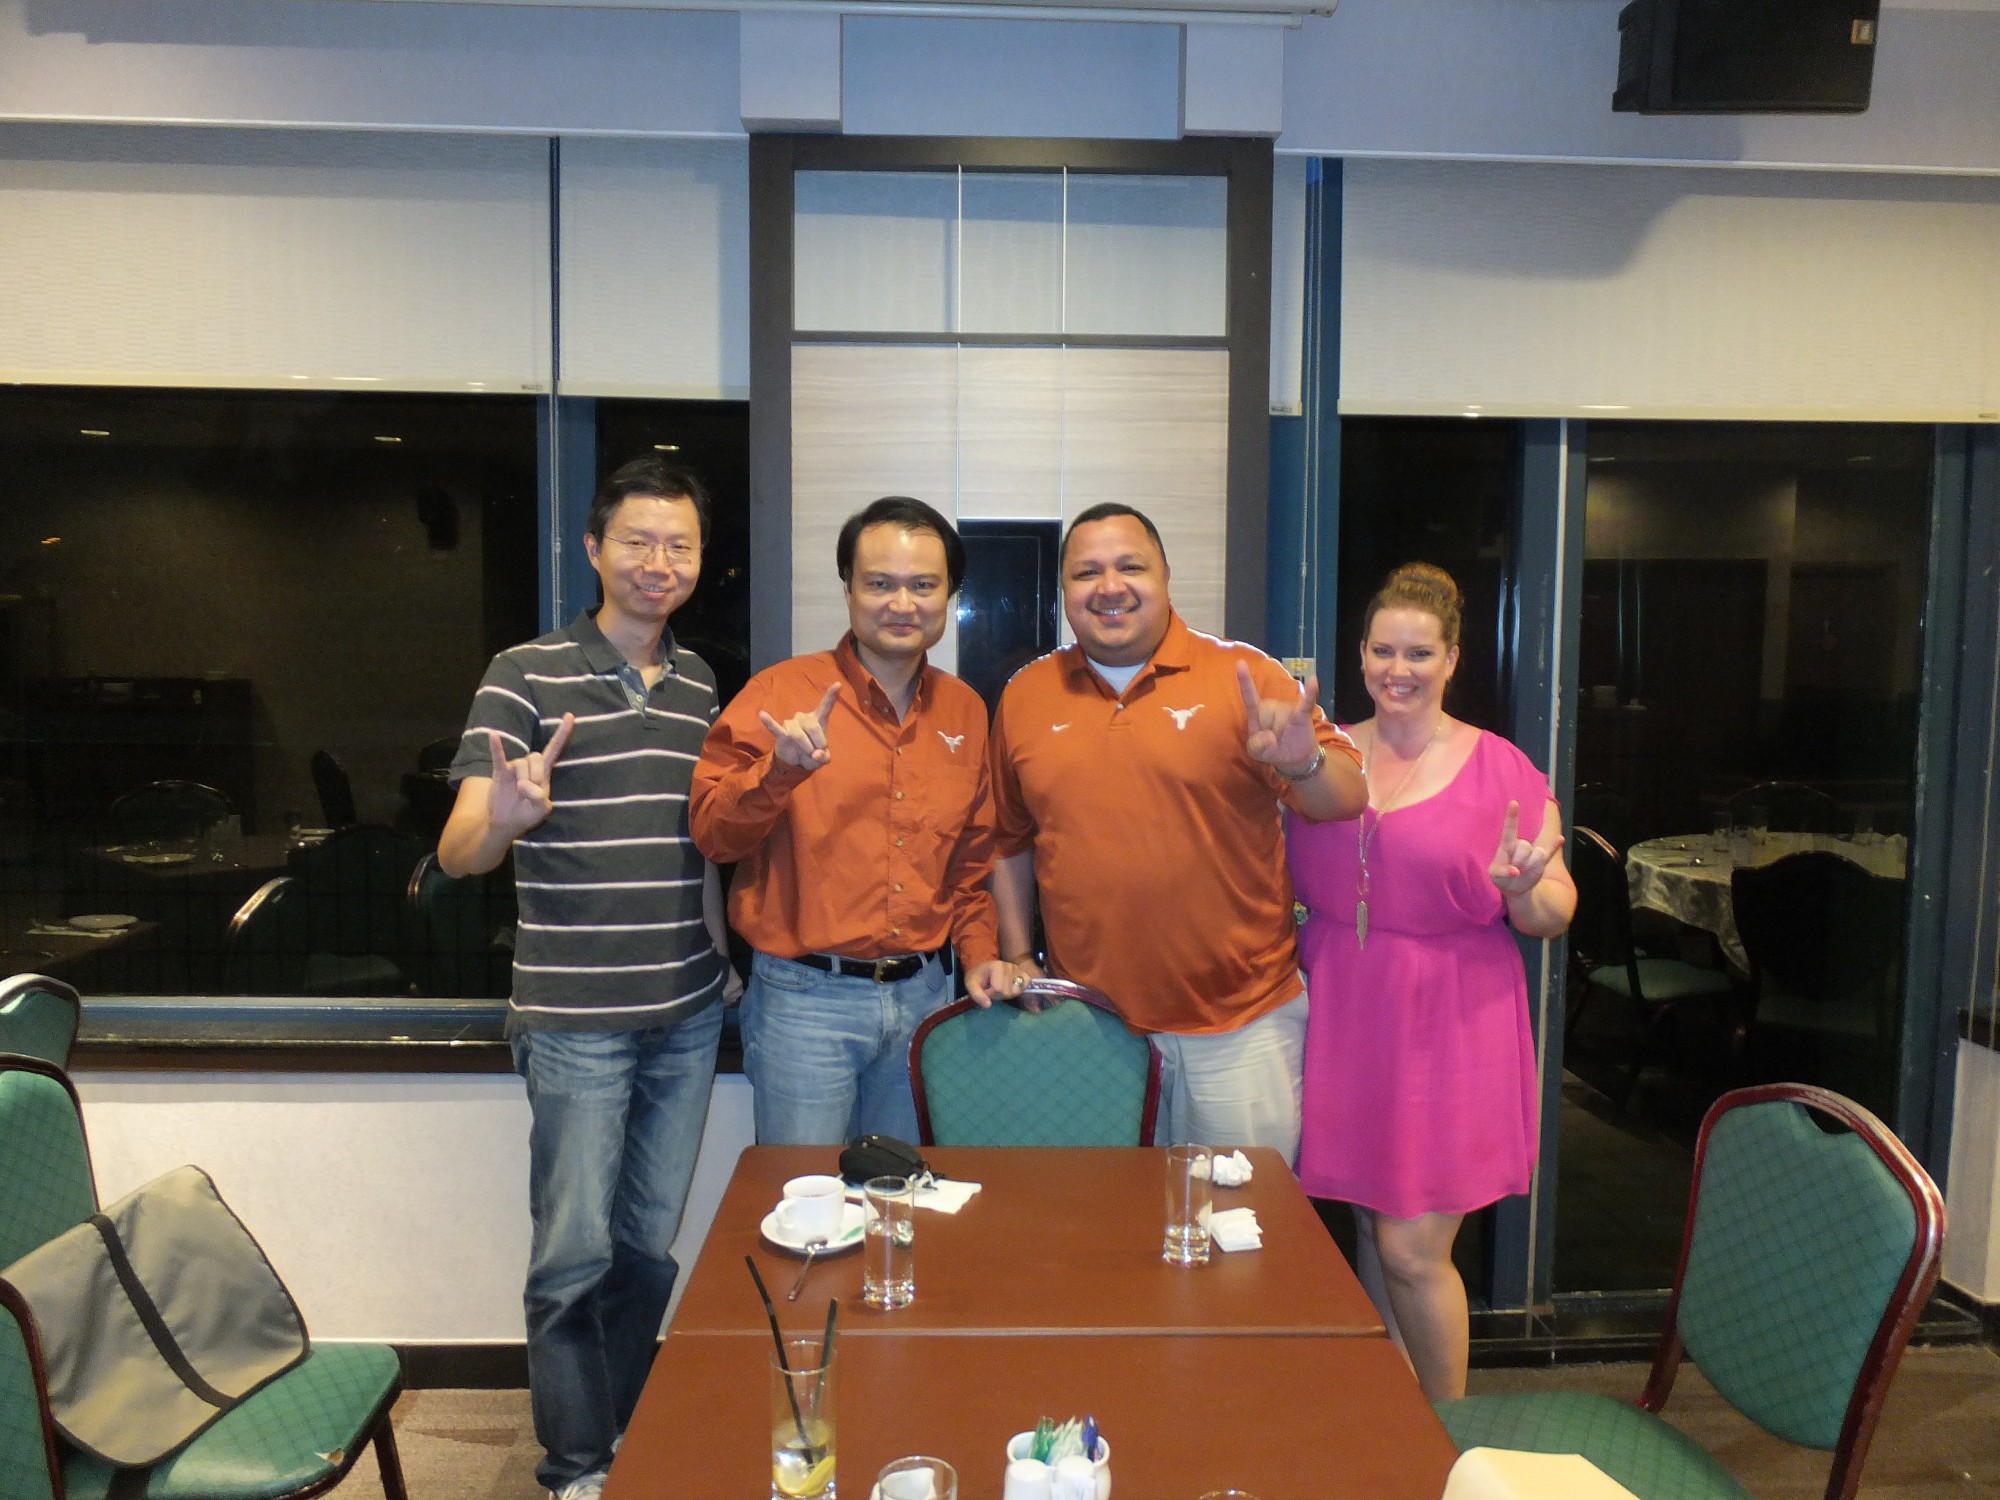 Dinner with Michael Carrizales, Texas Exes Chapter Advisory Board